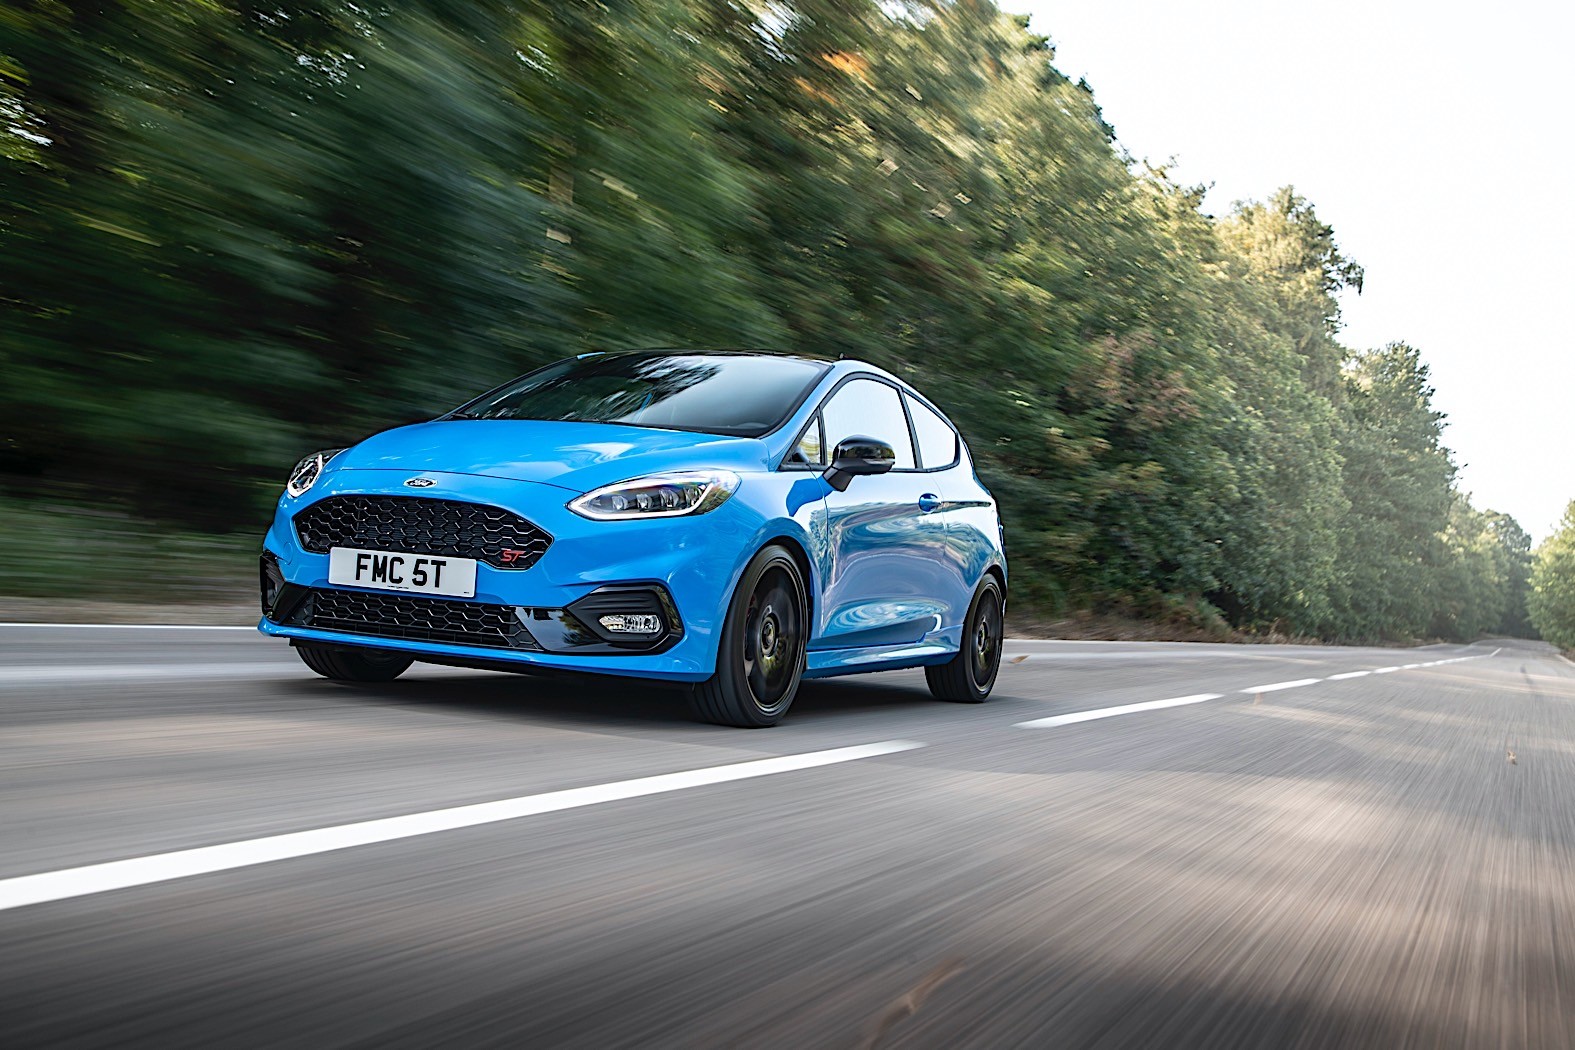 Ford Fiesta St Gets Low On New Suspension Uk Gets The Bulk Of Limited